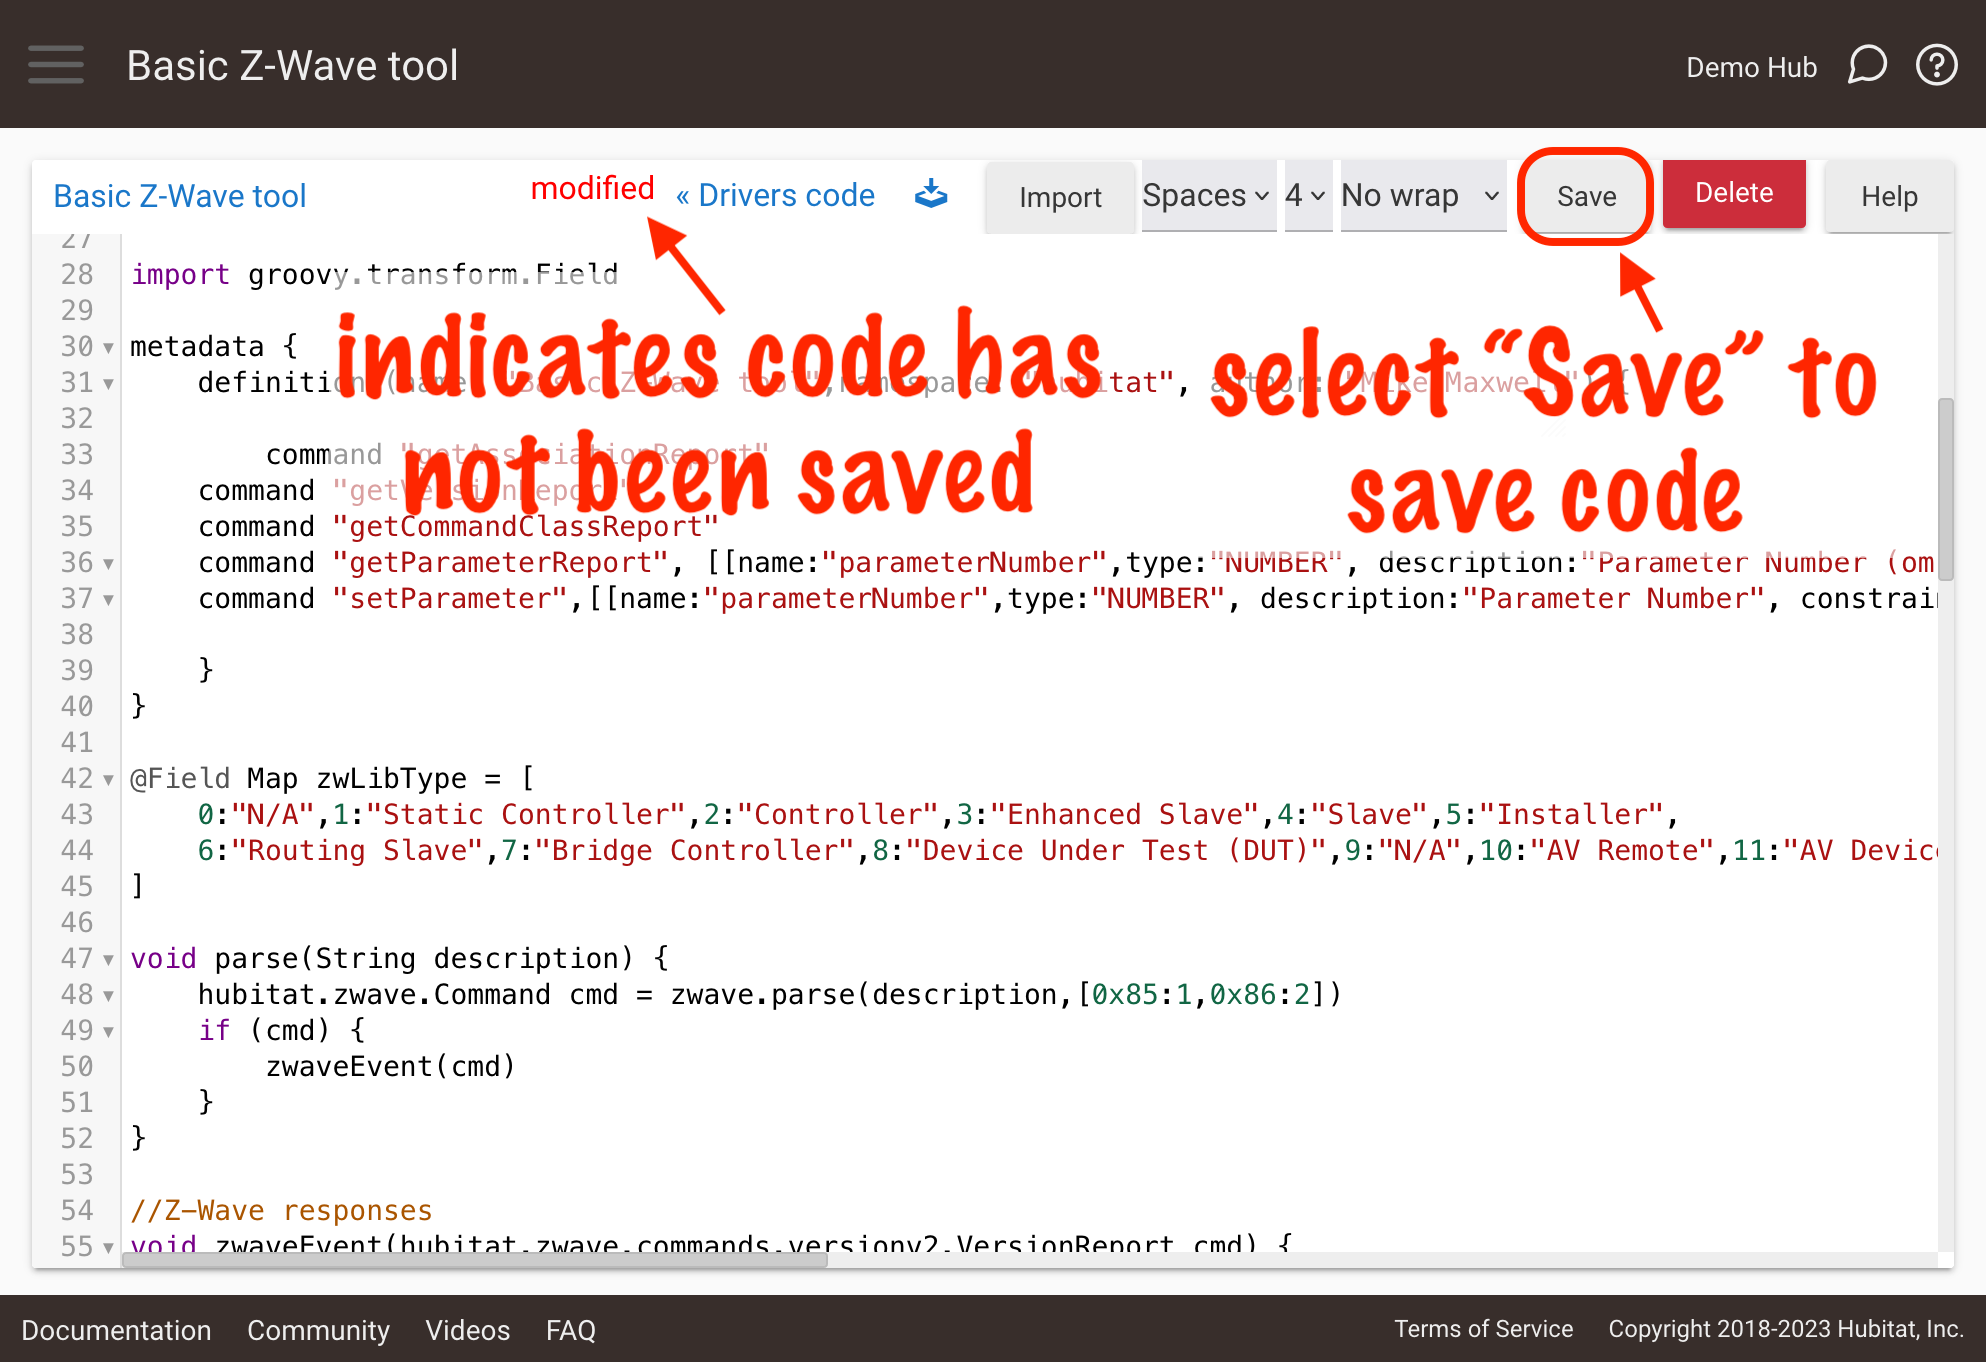 Screenshot of "modified text on driver code page, indicating "Save" should be selected